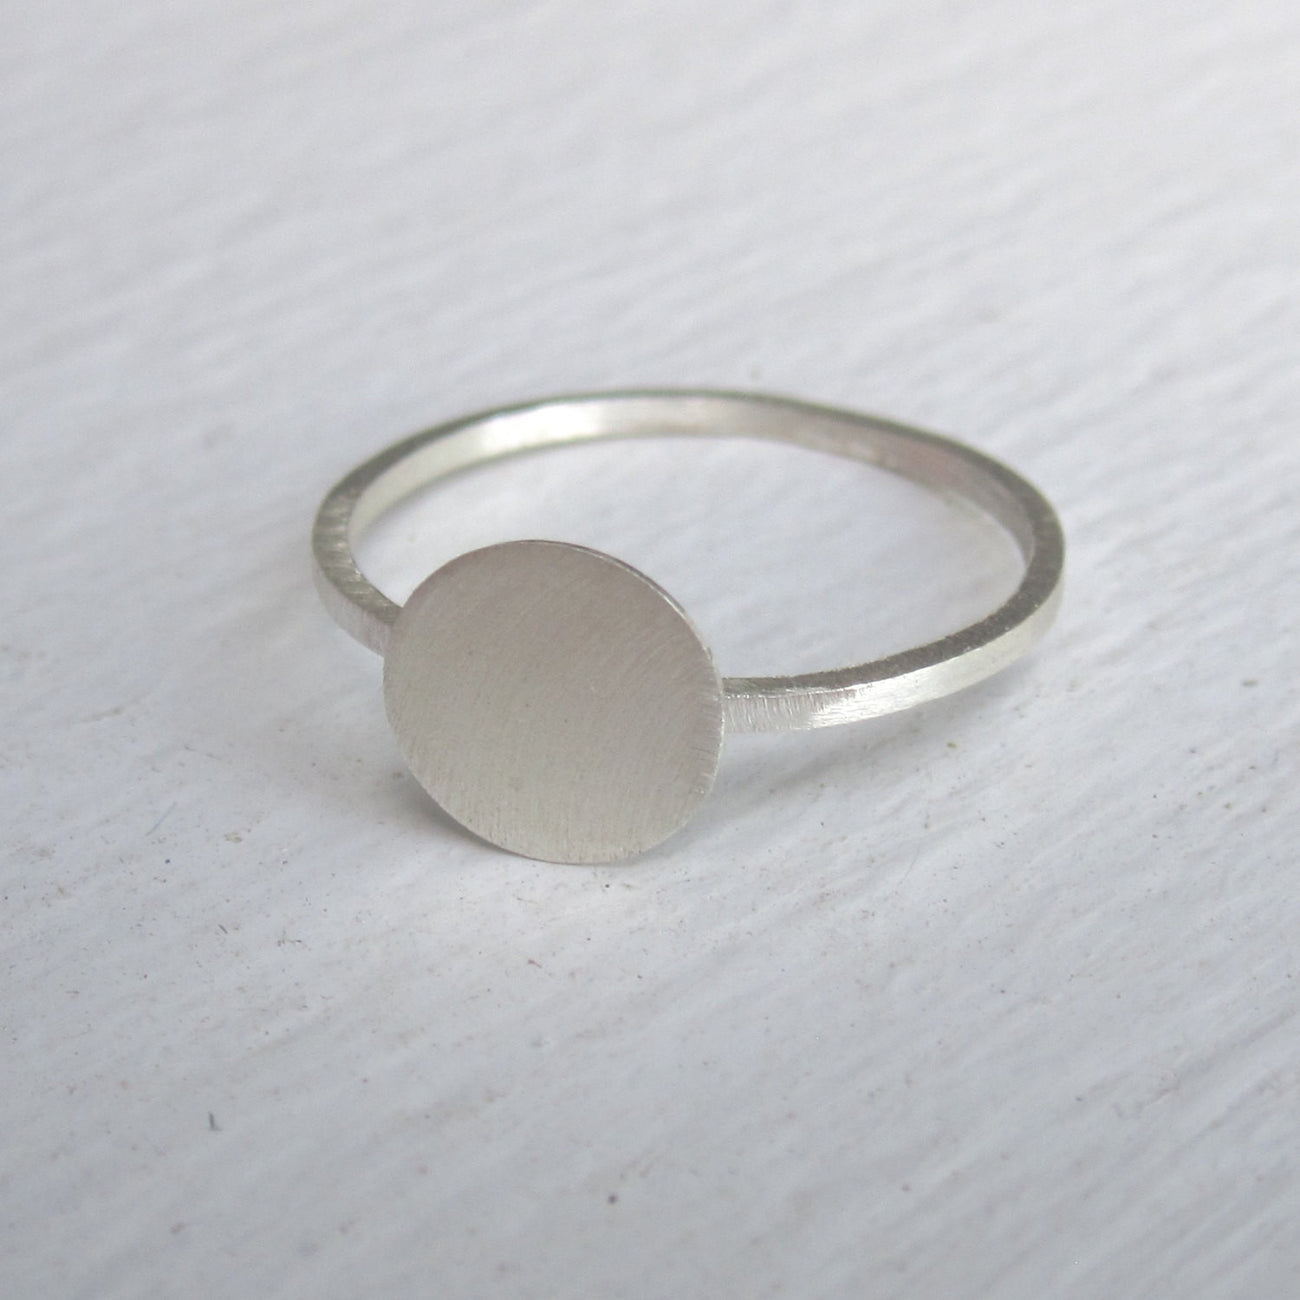 Stylish and Distinctive - Hand-Made Solid Silver Circle Disk Ring - 0112 - Virginia Wynne Designs